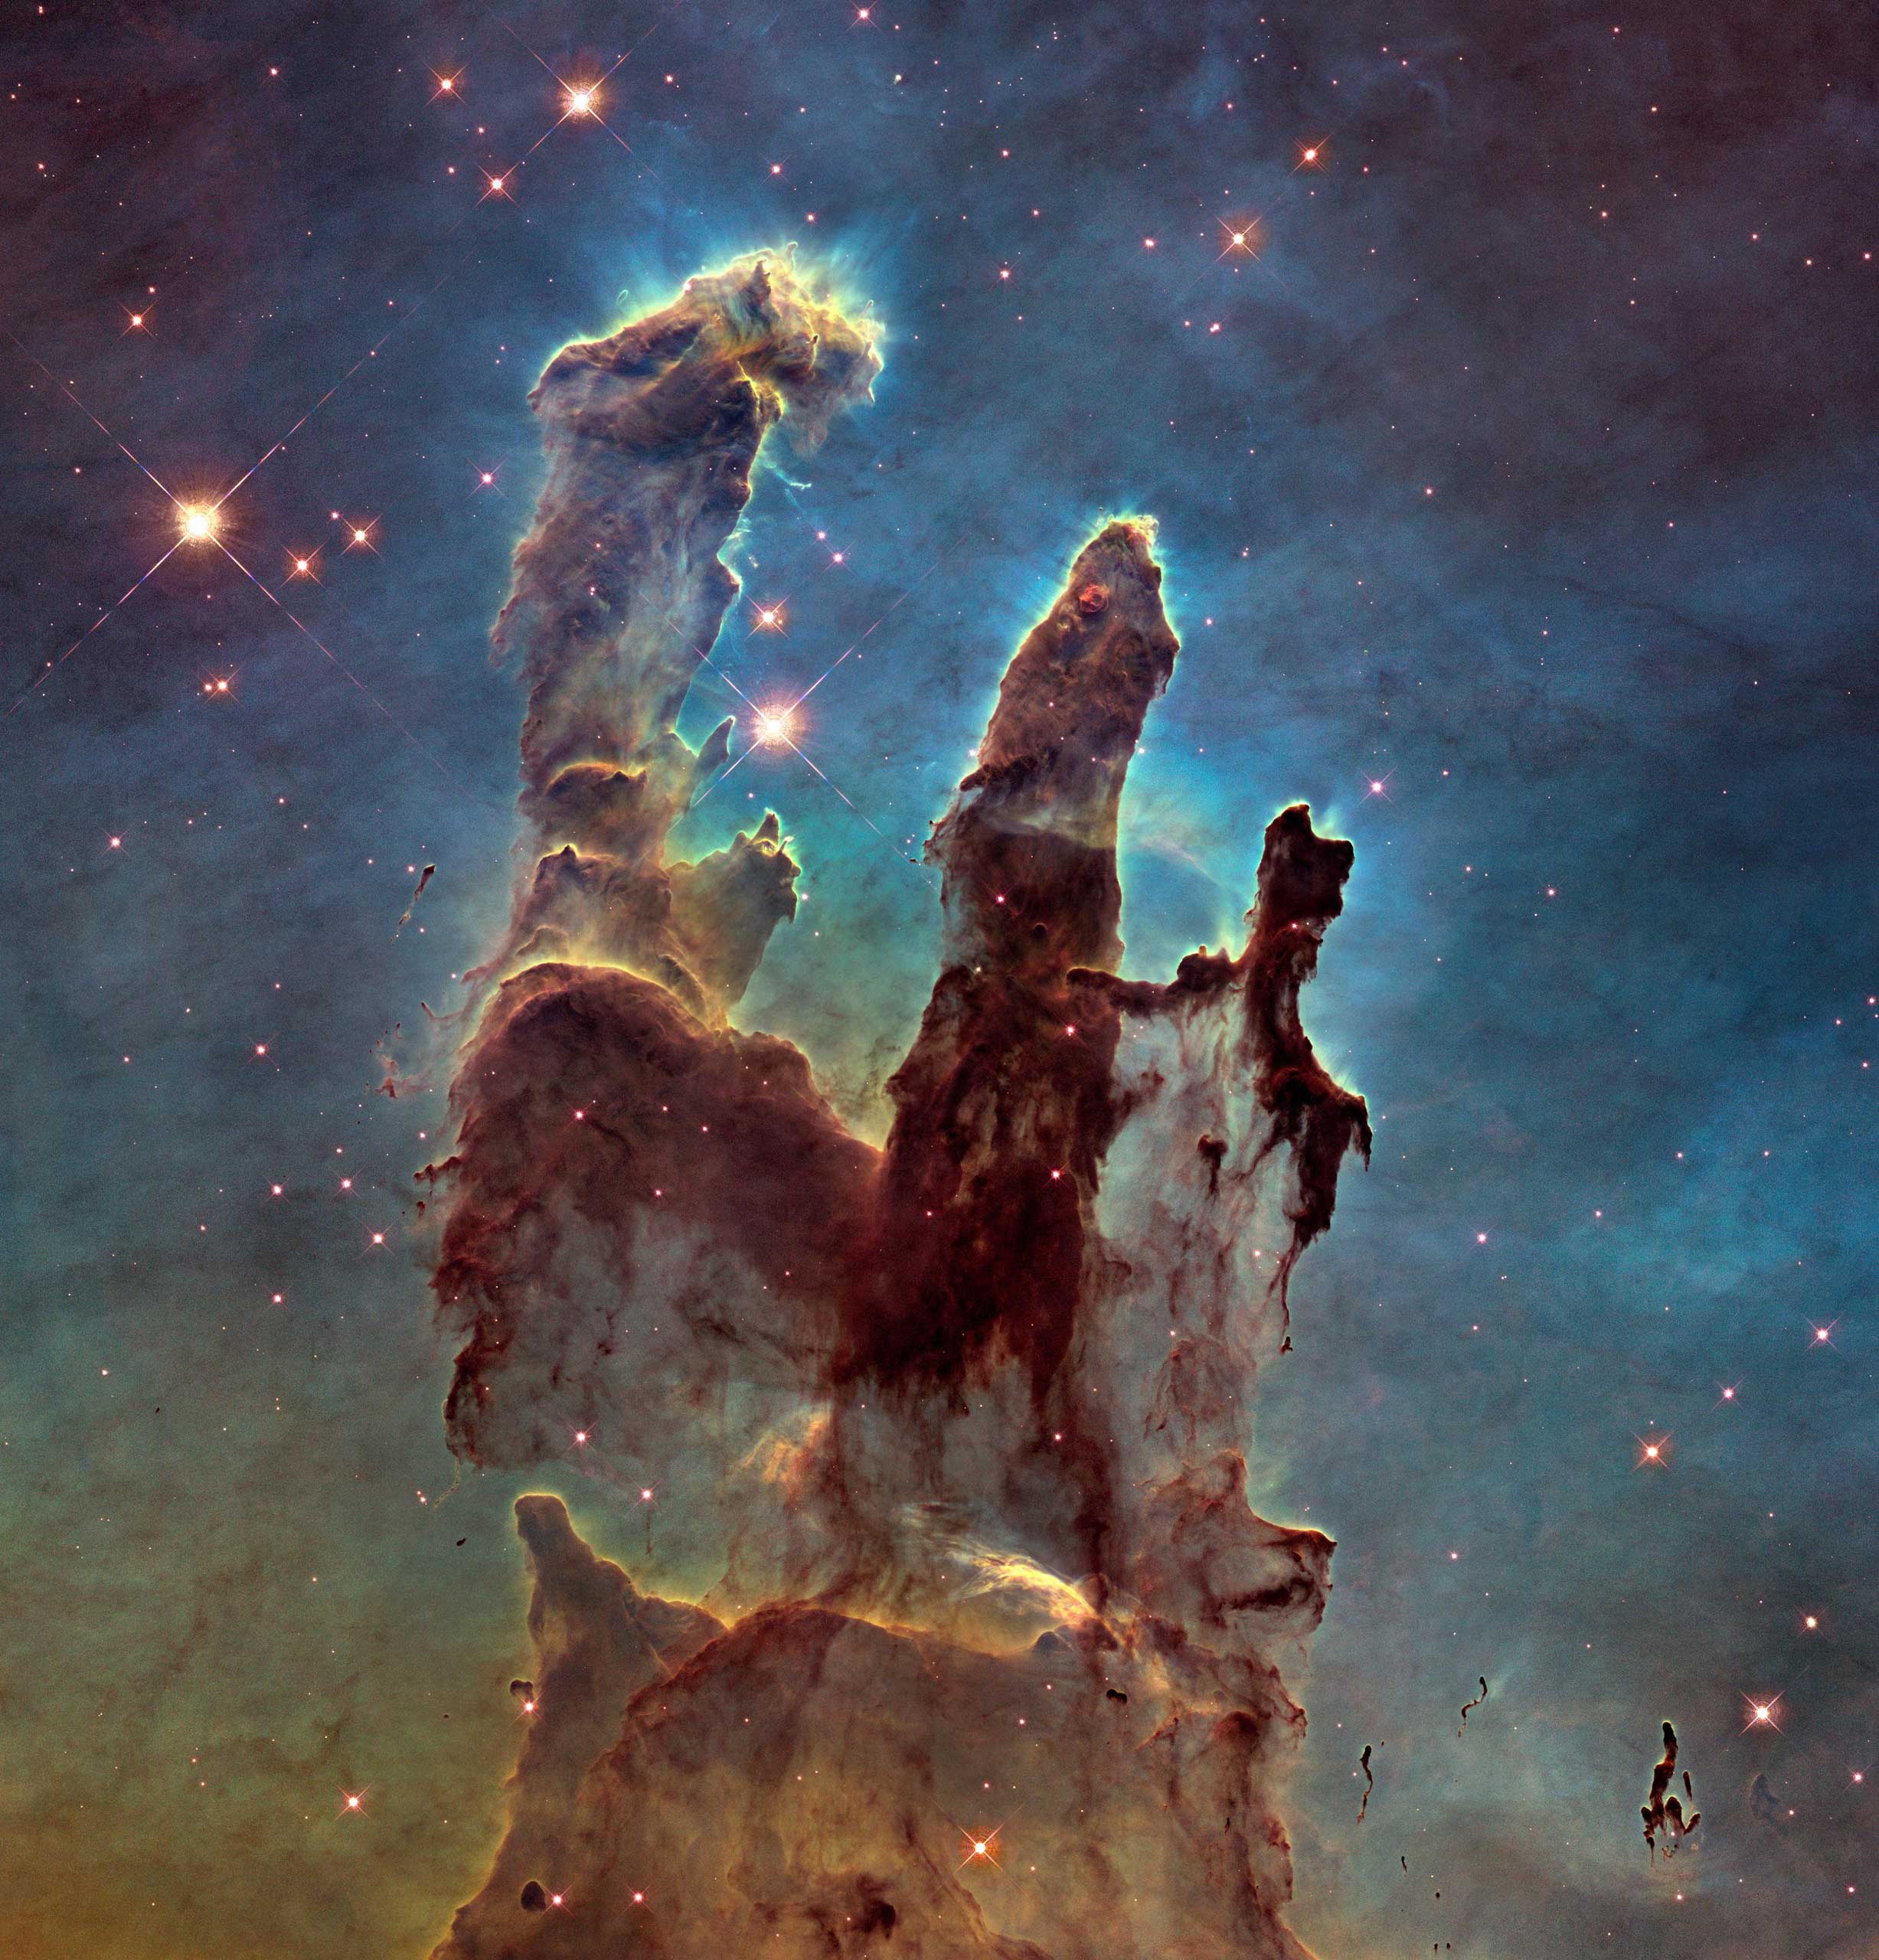 Jan. 5,  2015. To mark the 25th anniversary of the Hubble Telescope, NASA has revisited the famous Pillars of Creation, revealing a sharper and wider view of the structures in this visible-light image.